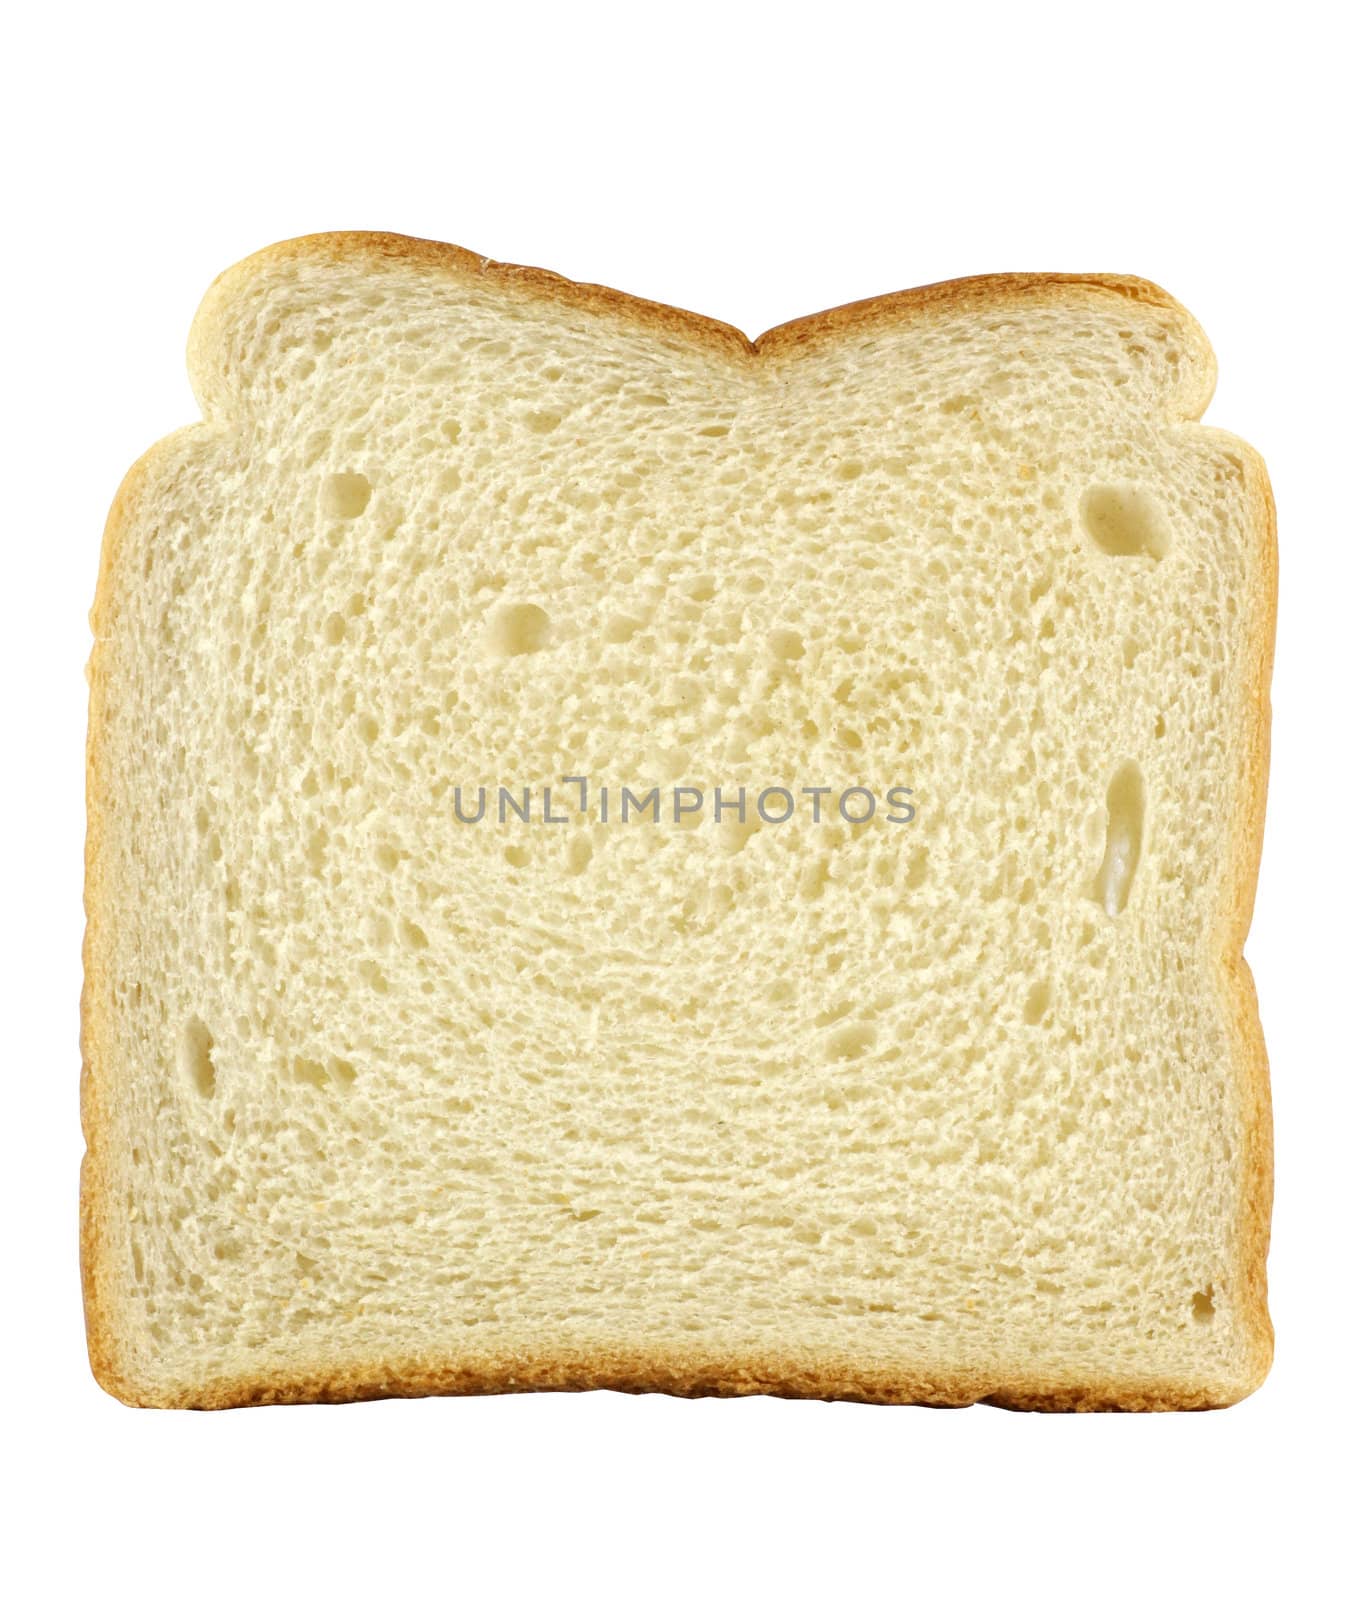 Slice of bread isolated in white